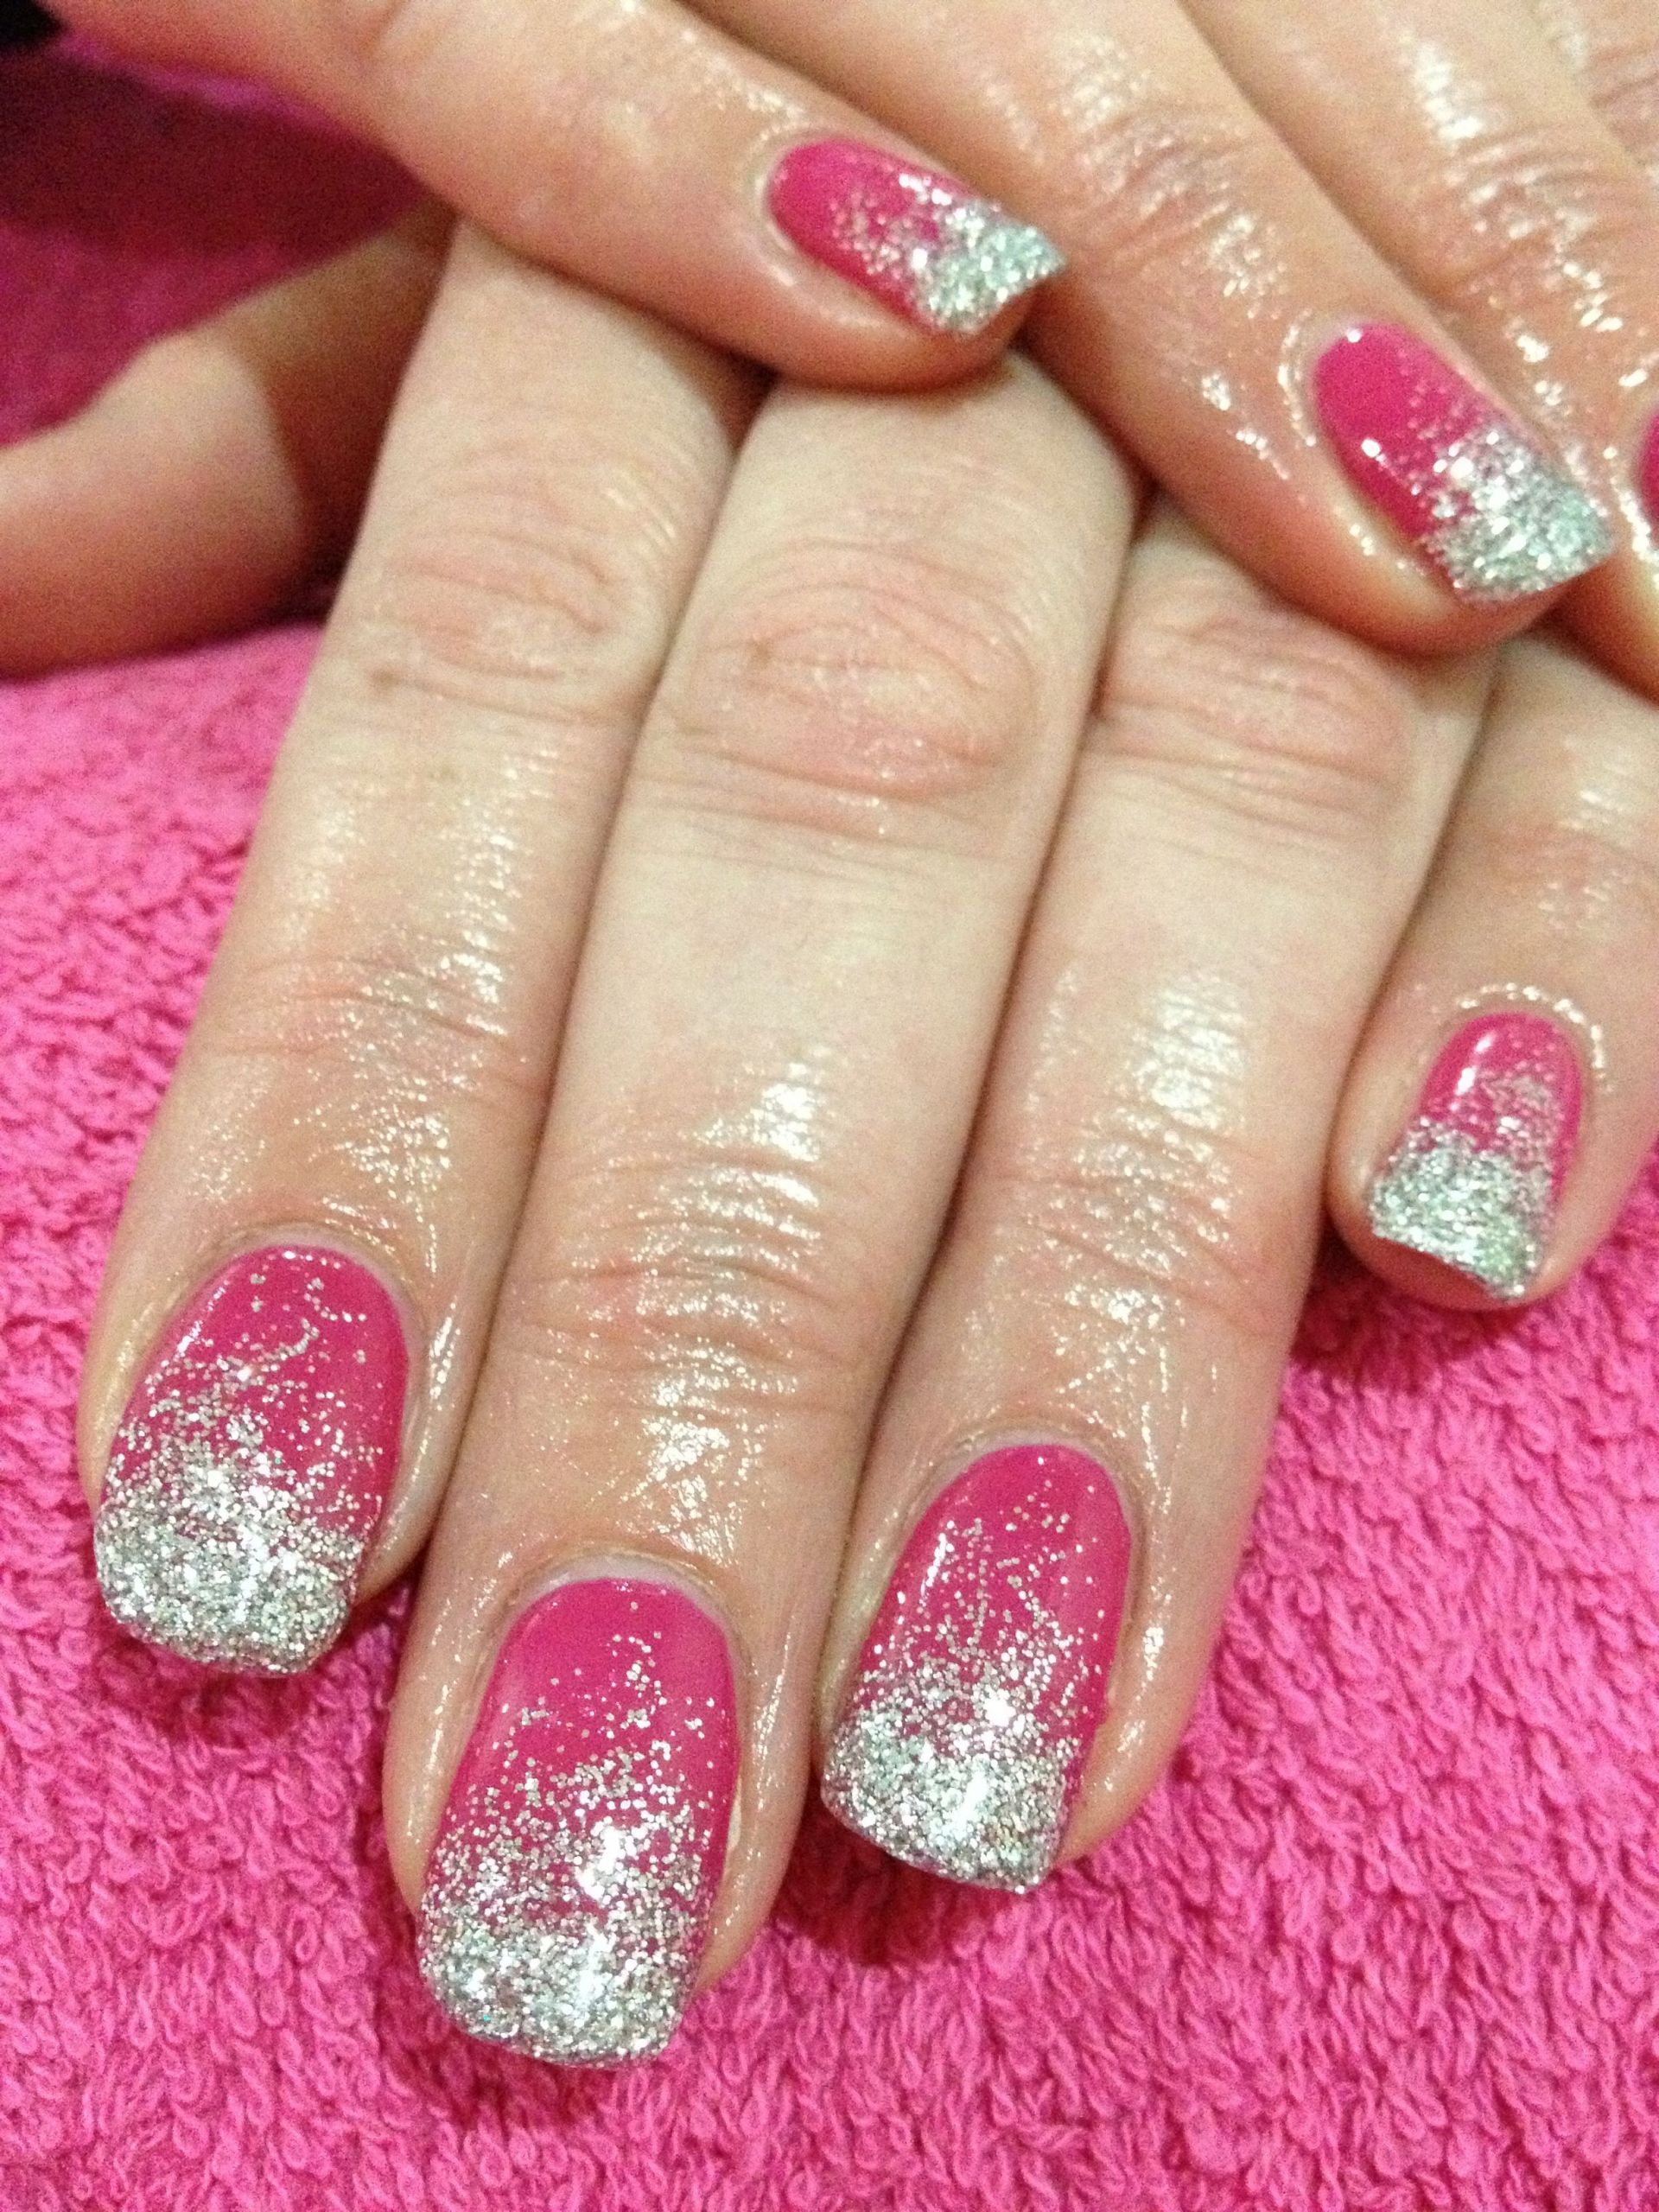 Silver Glitter Ombre Nails
 Pink and silver ombre glitter gel nails